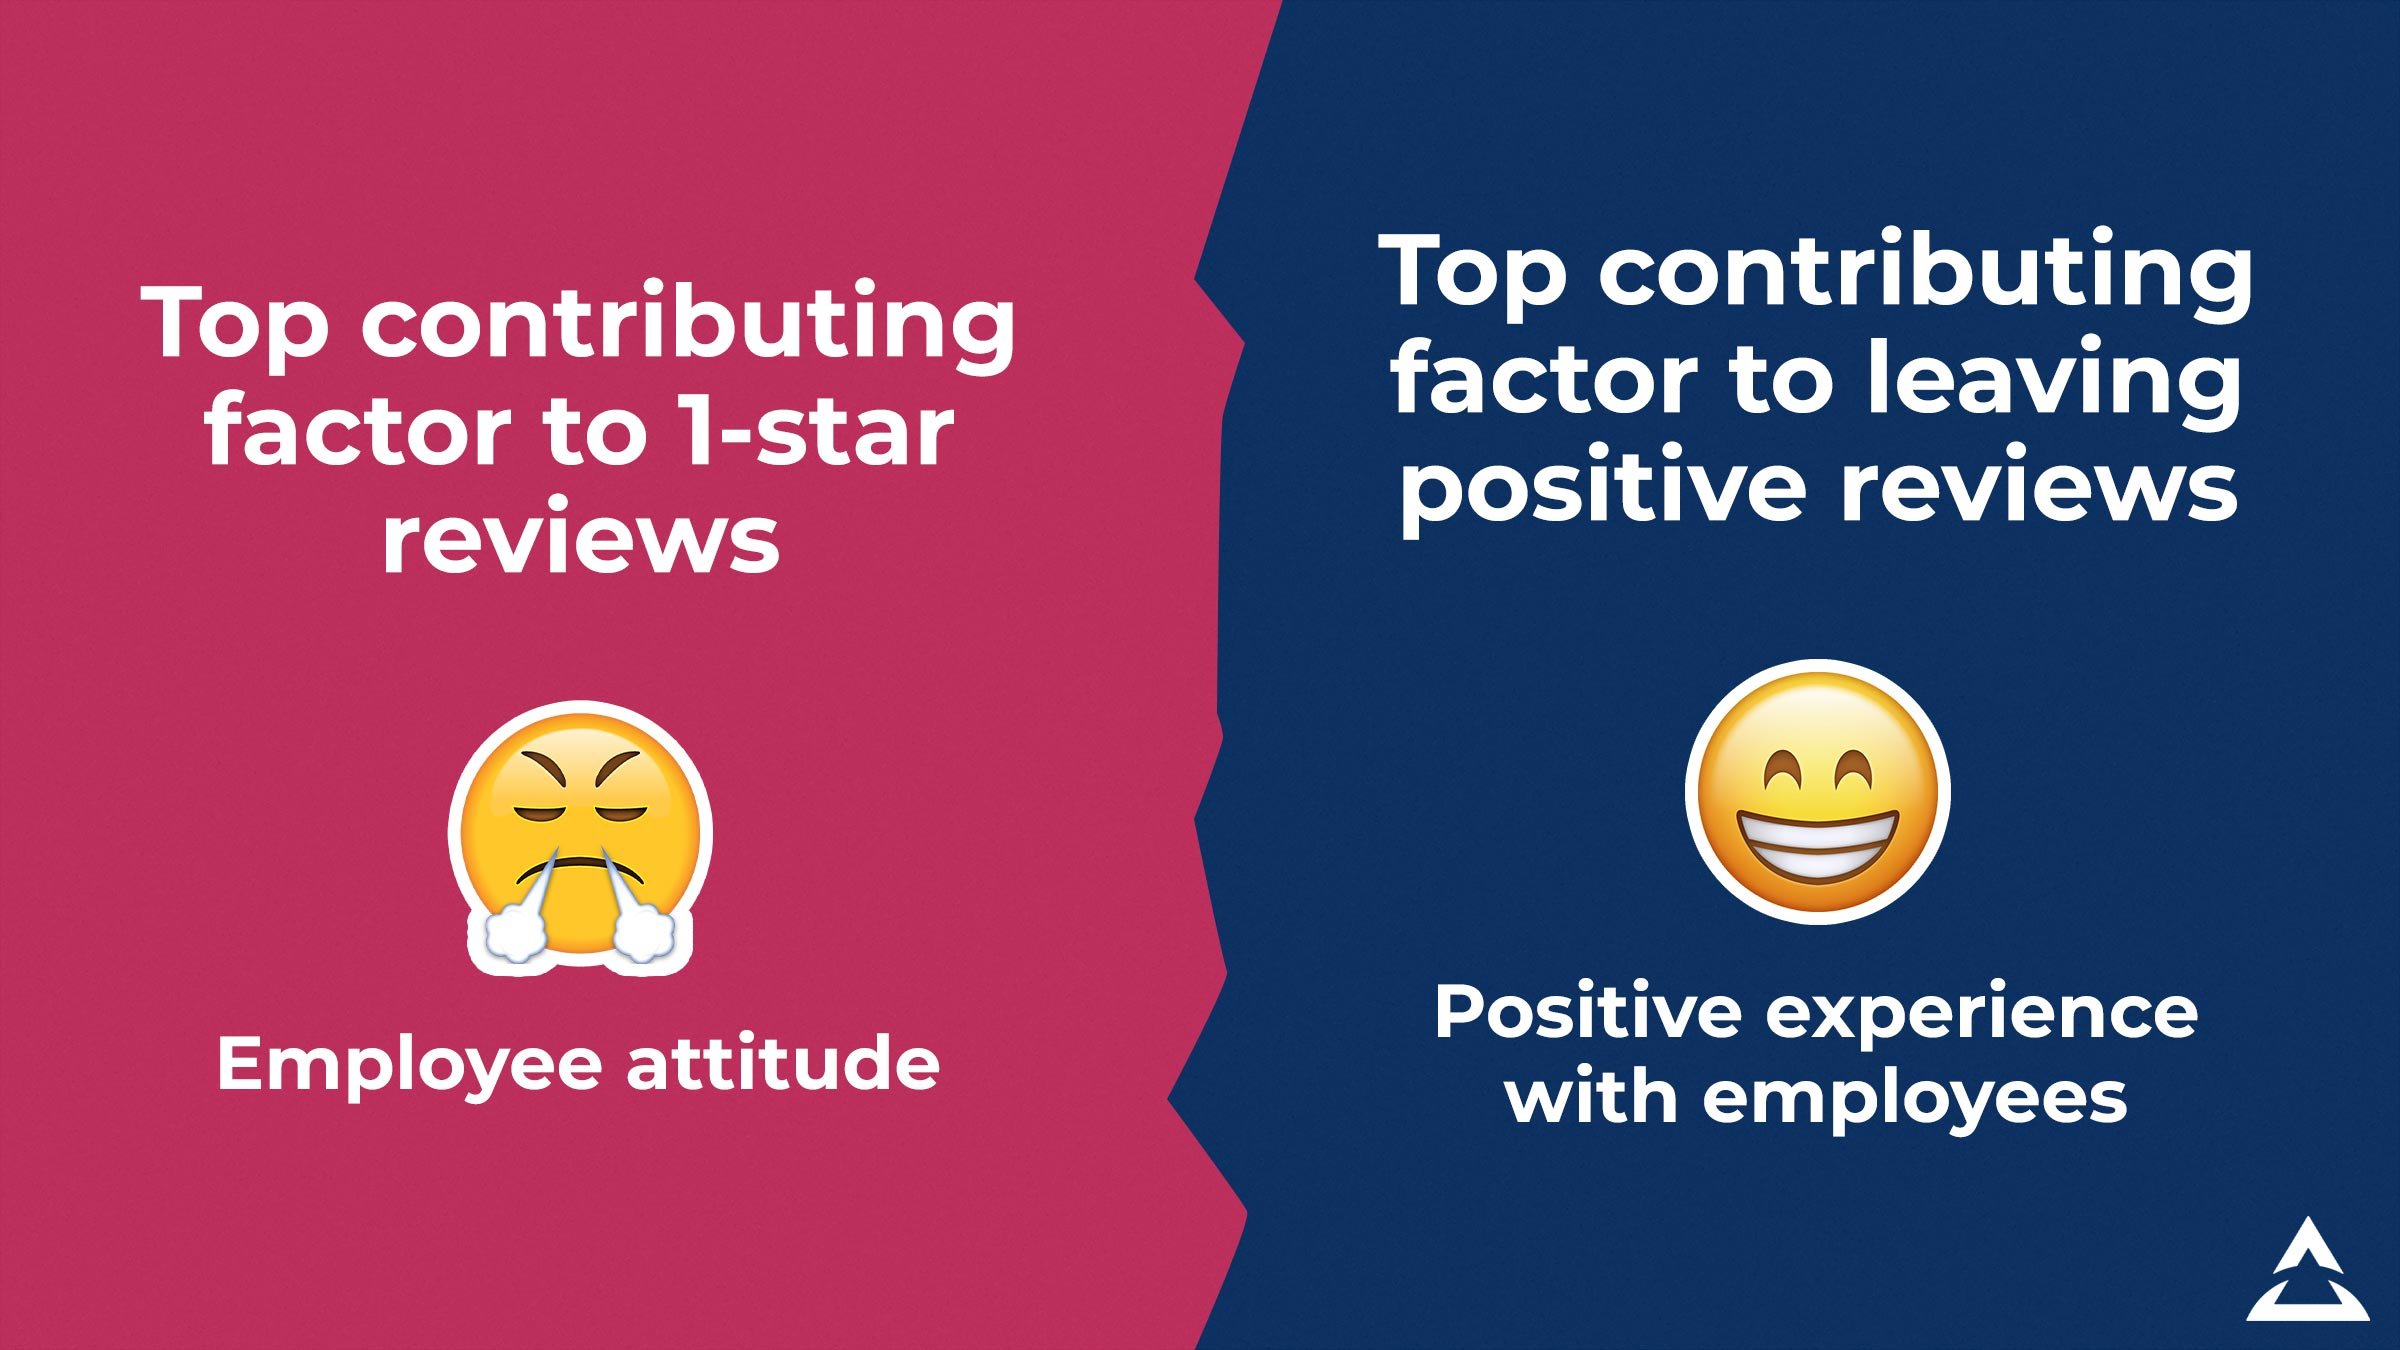 Top contributing factors to 1-star reviews is employee attitude. Top contributing factor to leaving positive reviews is a positive experience with employees.